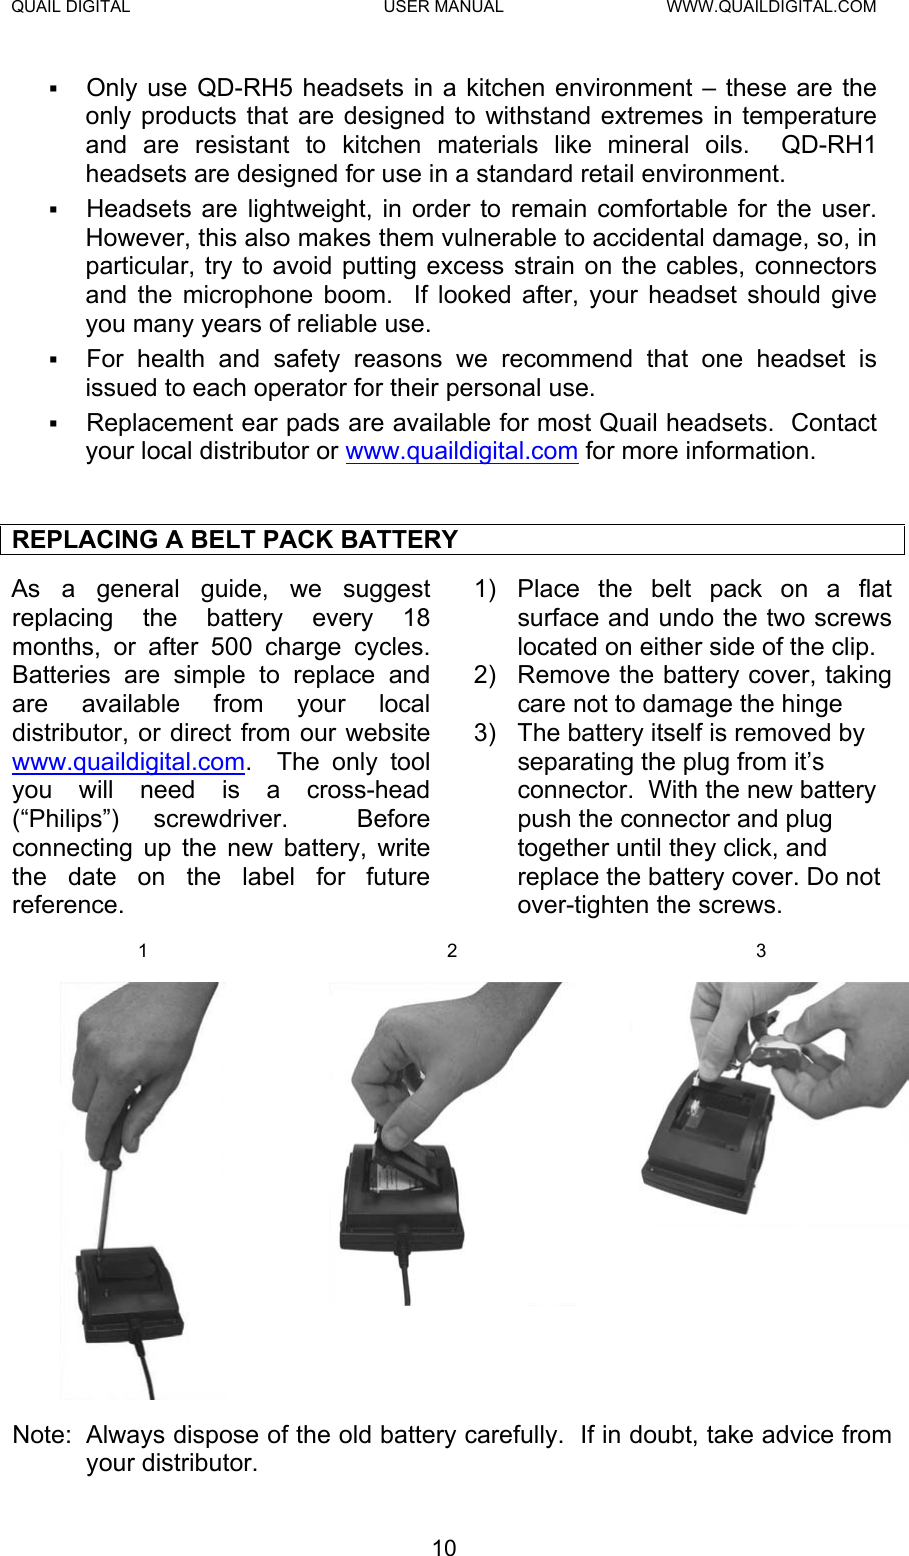 QUAIL DIGITAL  USER MANUAL  WWW.QUAILDIGITAL.COM   Only use QD-RH5 headsets in a kitchen environment – these are the only products that are designed to withstand extremes in temperature and are resistant to kitchen materials like mineral oils.  QD-RH1 headsets are designed for use in a standard retail environment.     Headsets are lightweight, in order to remain comfortable for the user.  However, this also makes them vulnerable to accidental damage, so, in particular, try to avoid putting excess strain on the cables, connectors and the microphone boom.  If looked after, your headset should give you many years of reliable use.    For health and safety reasons we recommend that one headset is issued to each operator for their personal use.   Replacement ear pads are available for most Quail headsets.  Contact your local distributor or www.quaildigital.com for more information.  REPLACING A BELT PACK BATTERY As a general guide, we suggest replacing the battery every 18 months, or after 500 charge cycles.  Batteries are simple to replace and are available from your local distributor, or direct from our website www.quaildigital.com.  The only tool you will need is a cross-head (“Philips”) screwdriver.  Before connecting up the new battery, write the date on the label for future reference. 1)  Place the belt pack on a flat surface and undo the two screws located on either side of the clip.  2)  Remove the battery cover, taking care not to damage the hinge 3)  The battery itself is removed by separating the plug from it’s connector.  With the new battery push the connector and plug together until they click, and replace the battery cover. Do not over-tighten the screws.   1 2 3   Note:  Always dispose of the old battery carefully.  If in doubt, take advice from your distributor.  10  